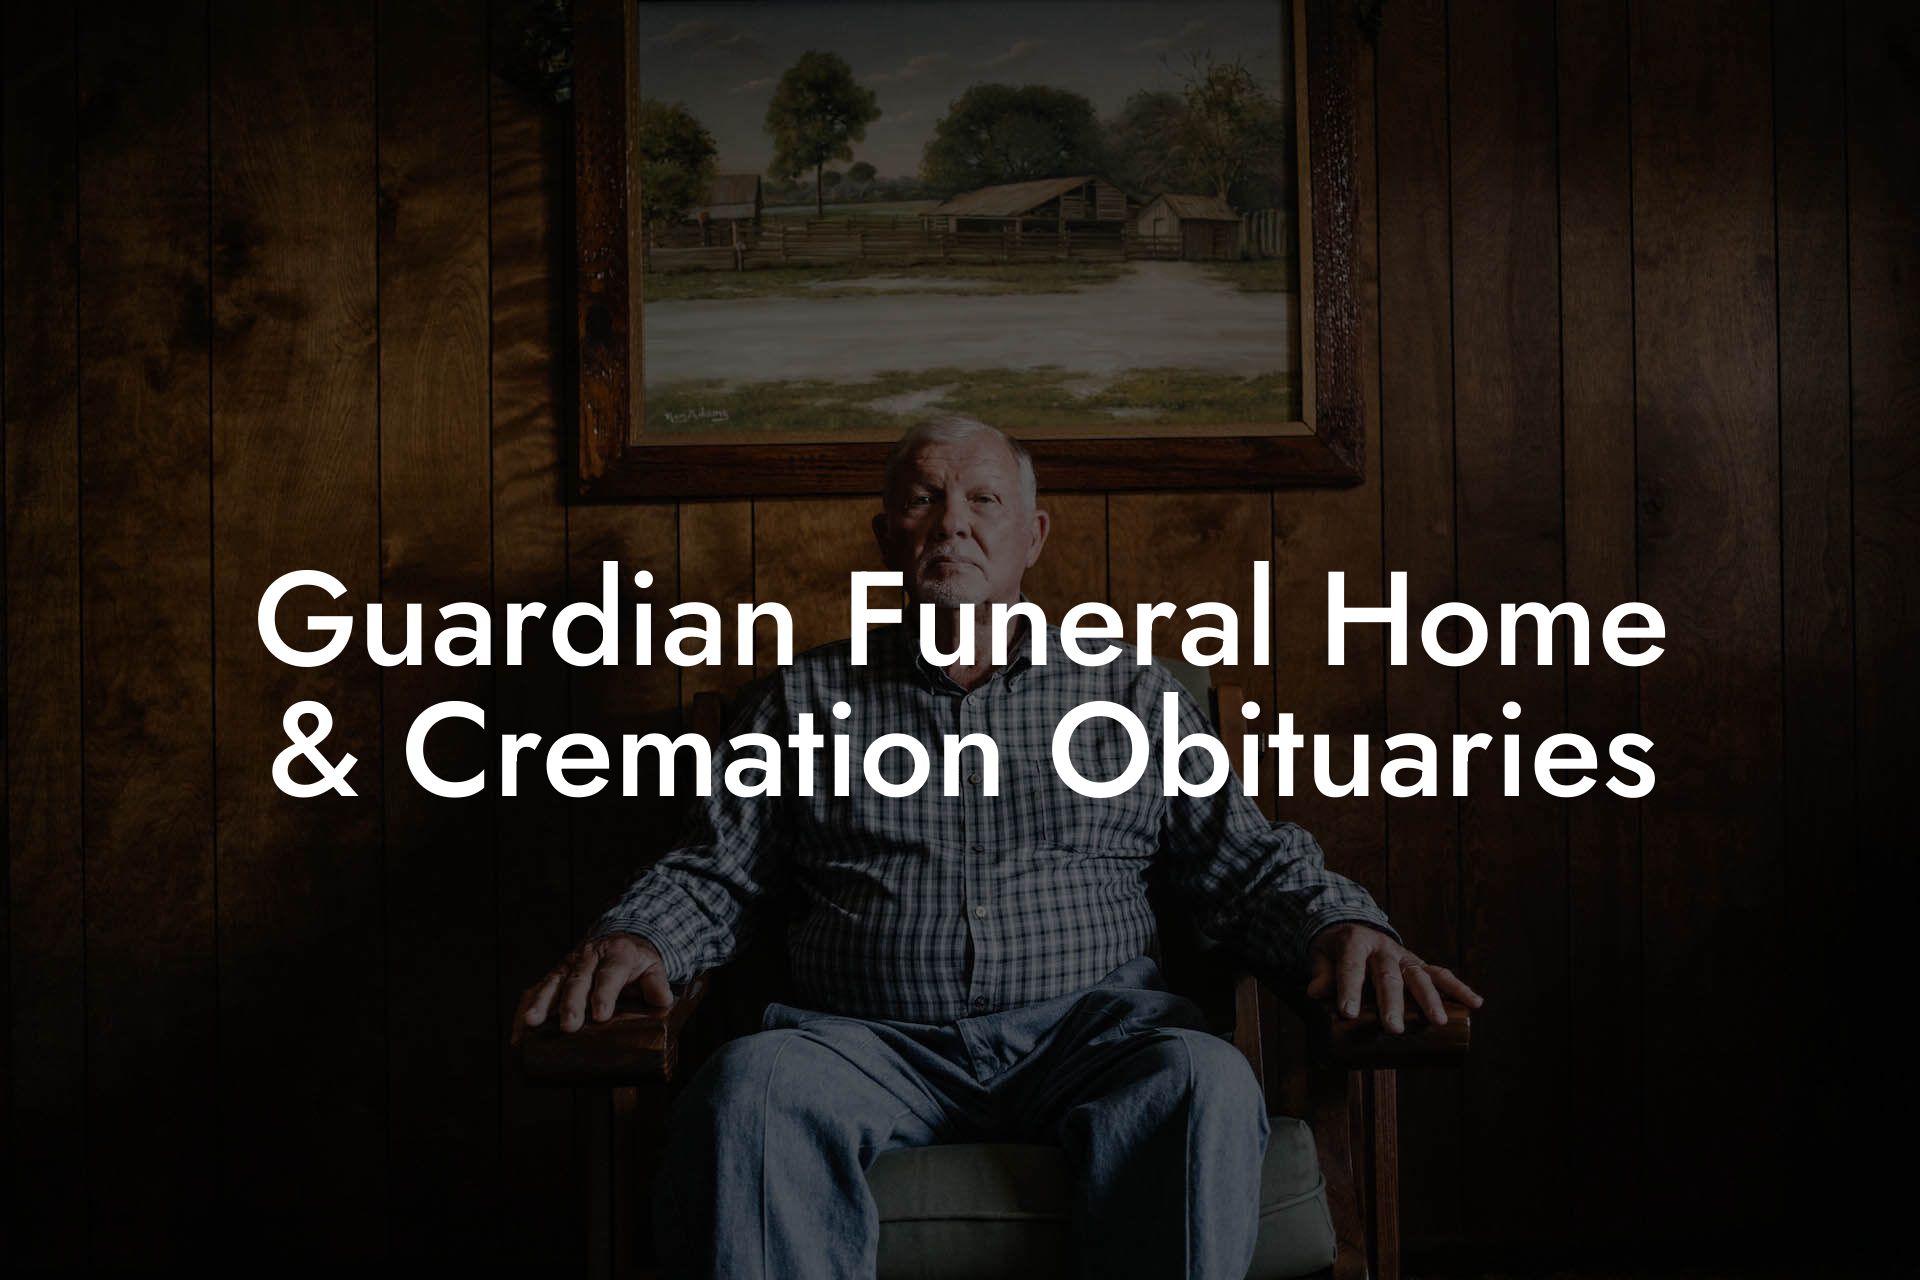 Guardian Funeral Home & Cremation Obituaries - Eulogy Assistant